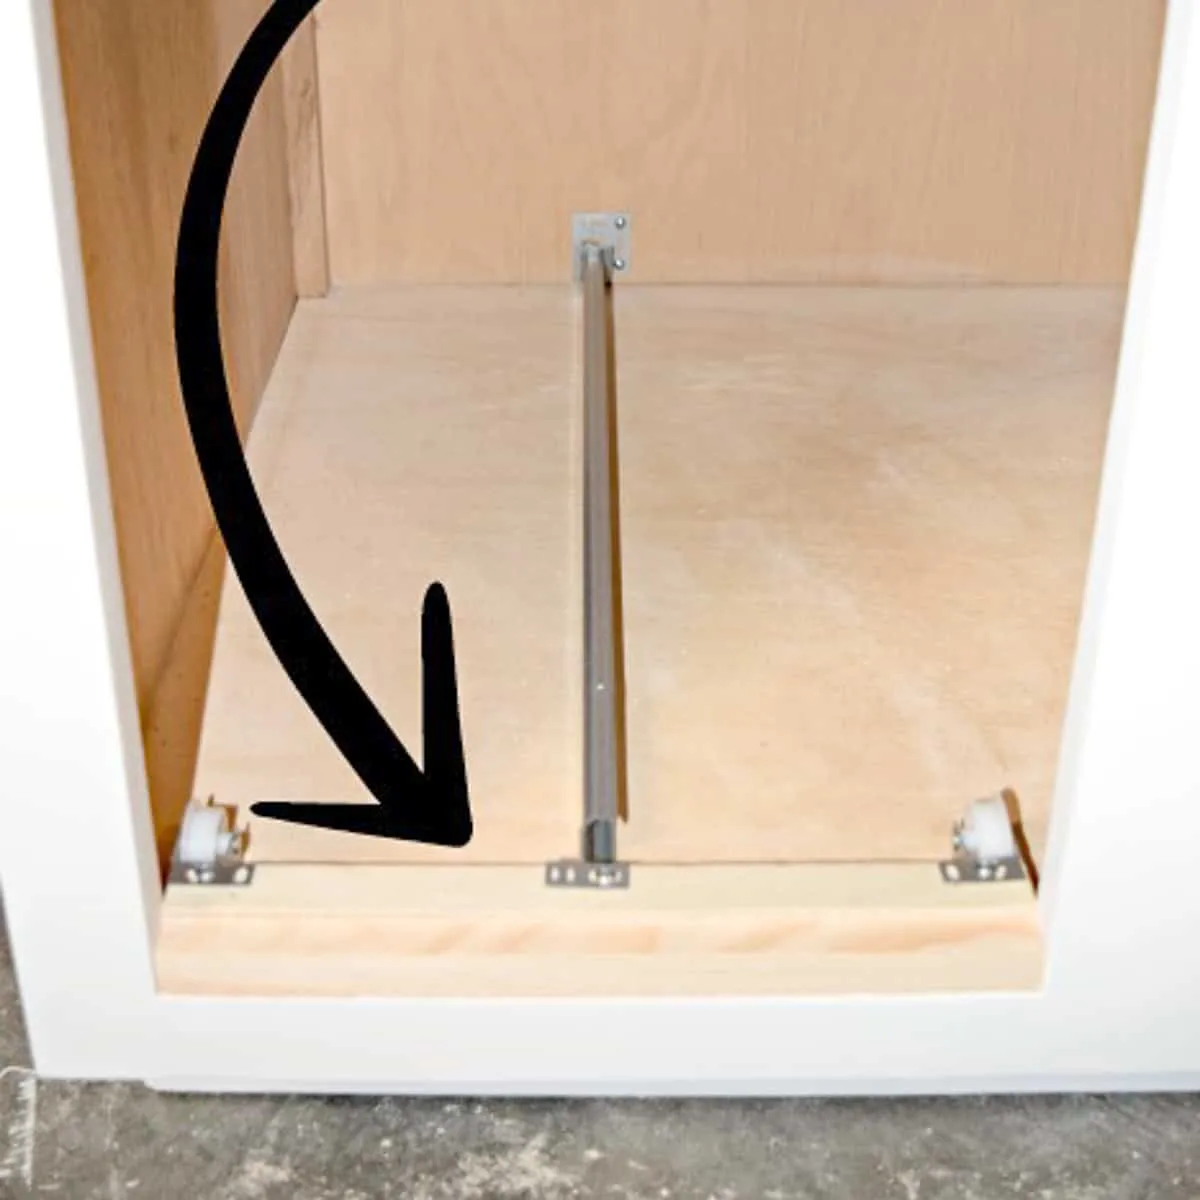 How to Add a Pull Out Trash Can to a Cabinet - The Handyman's Daughter